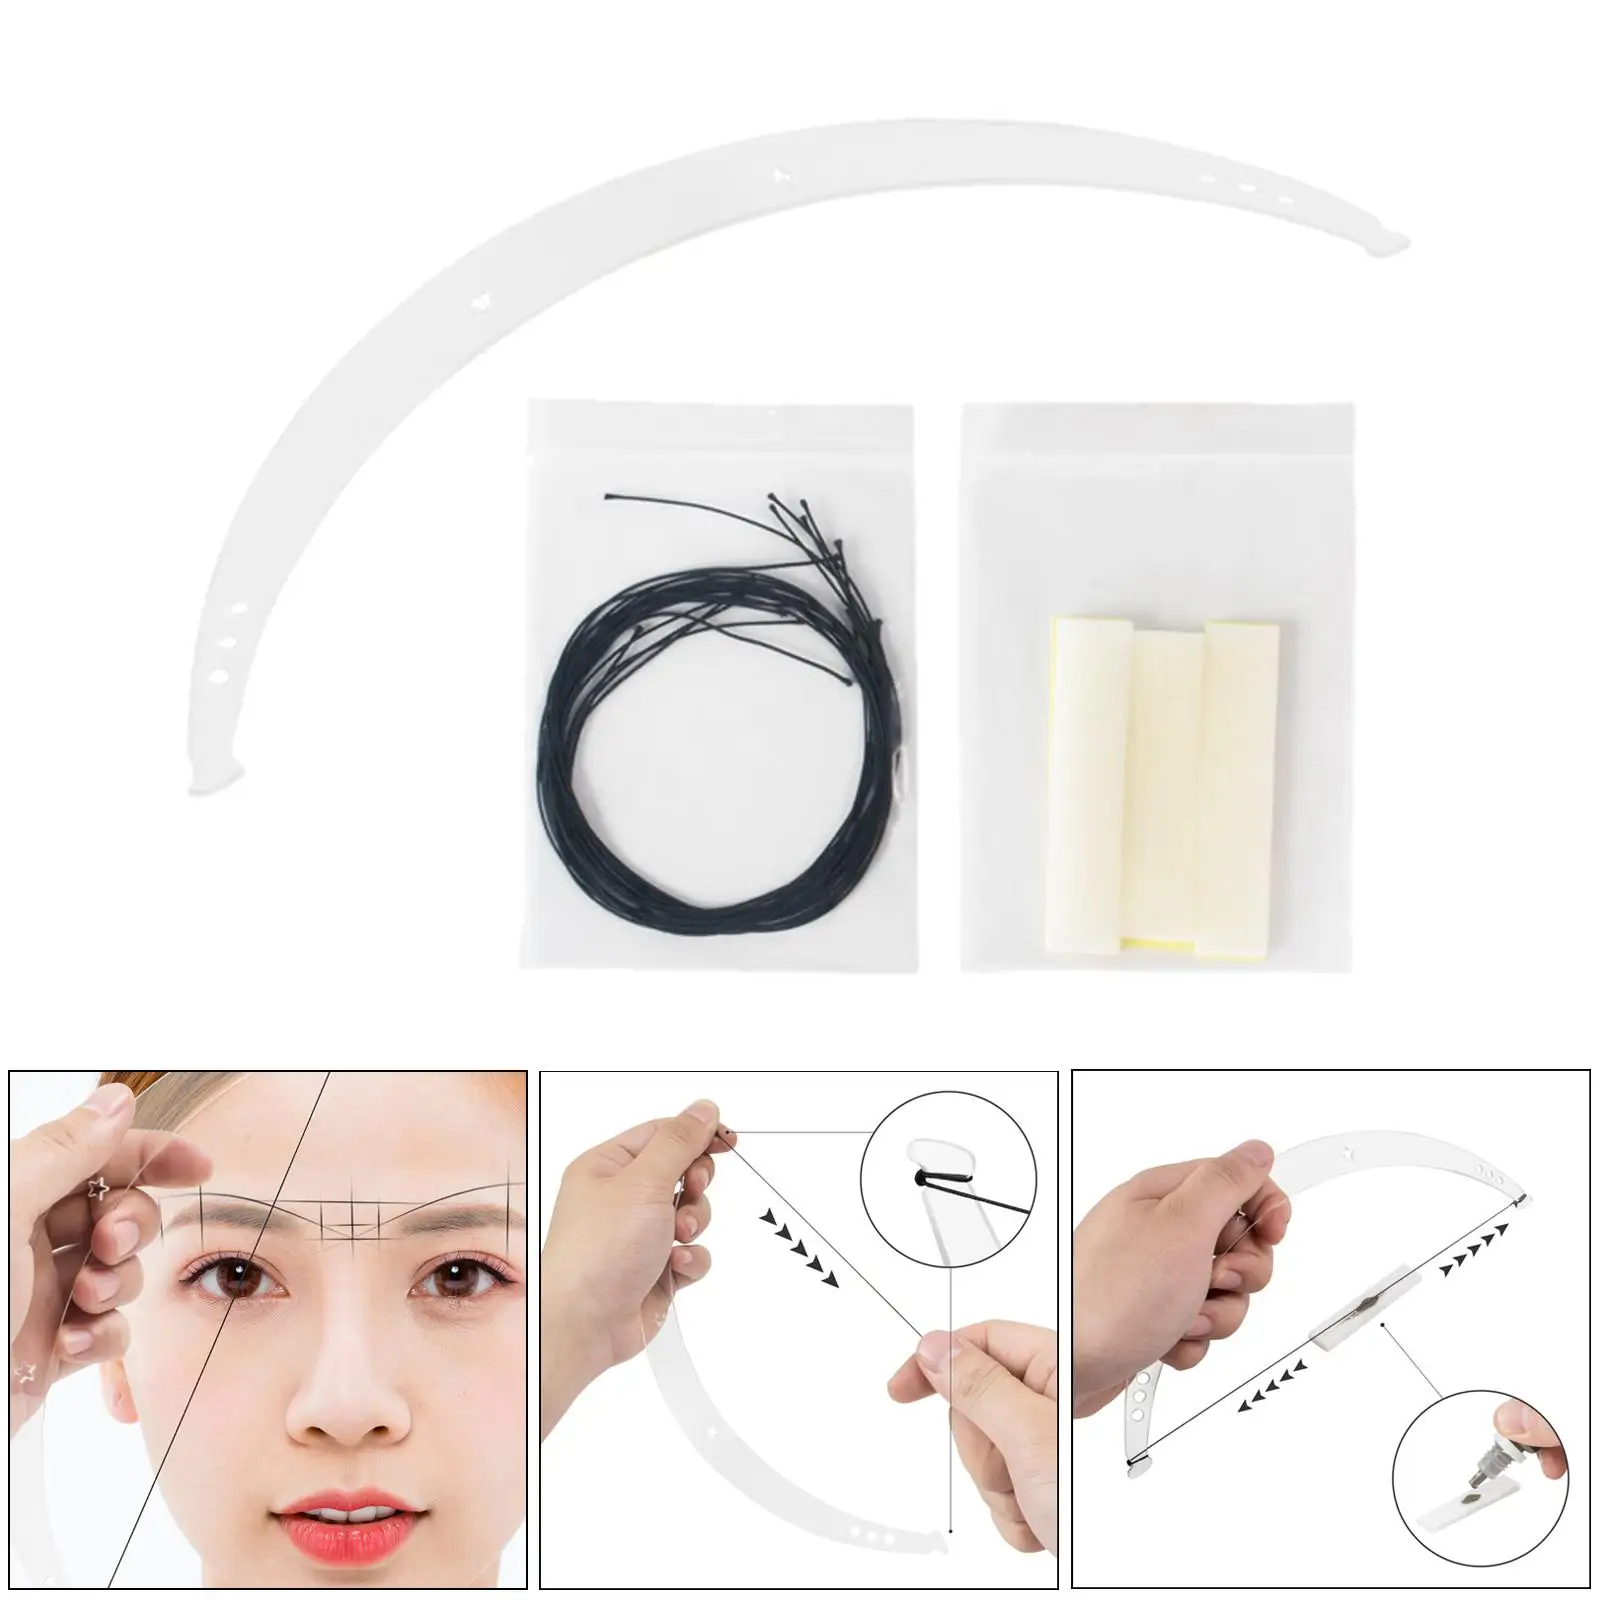 Eyebrow Ruler Accessories Permanent Gold Ratio Professional Balance Makeup Stencil Measure Ruler Shaper for Eyebrow Drawing Line